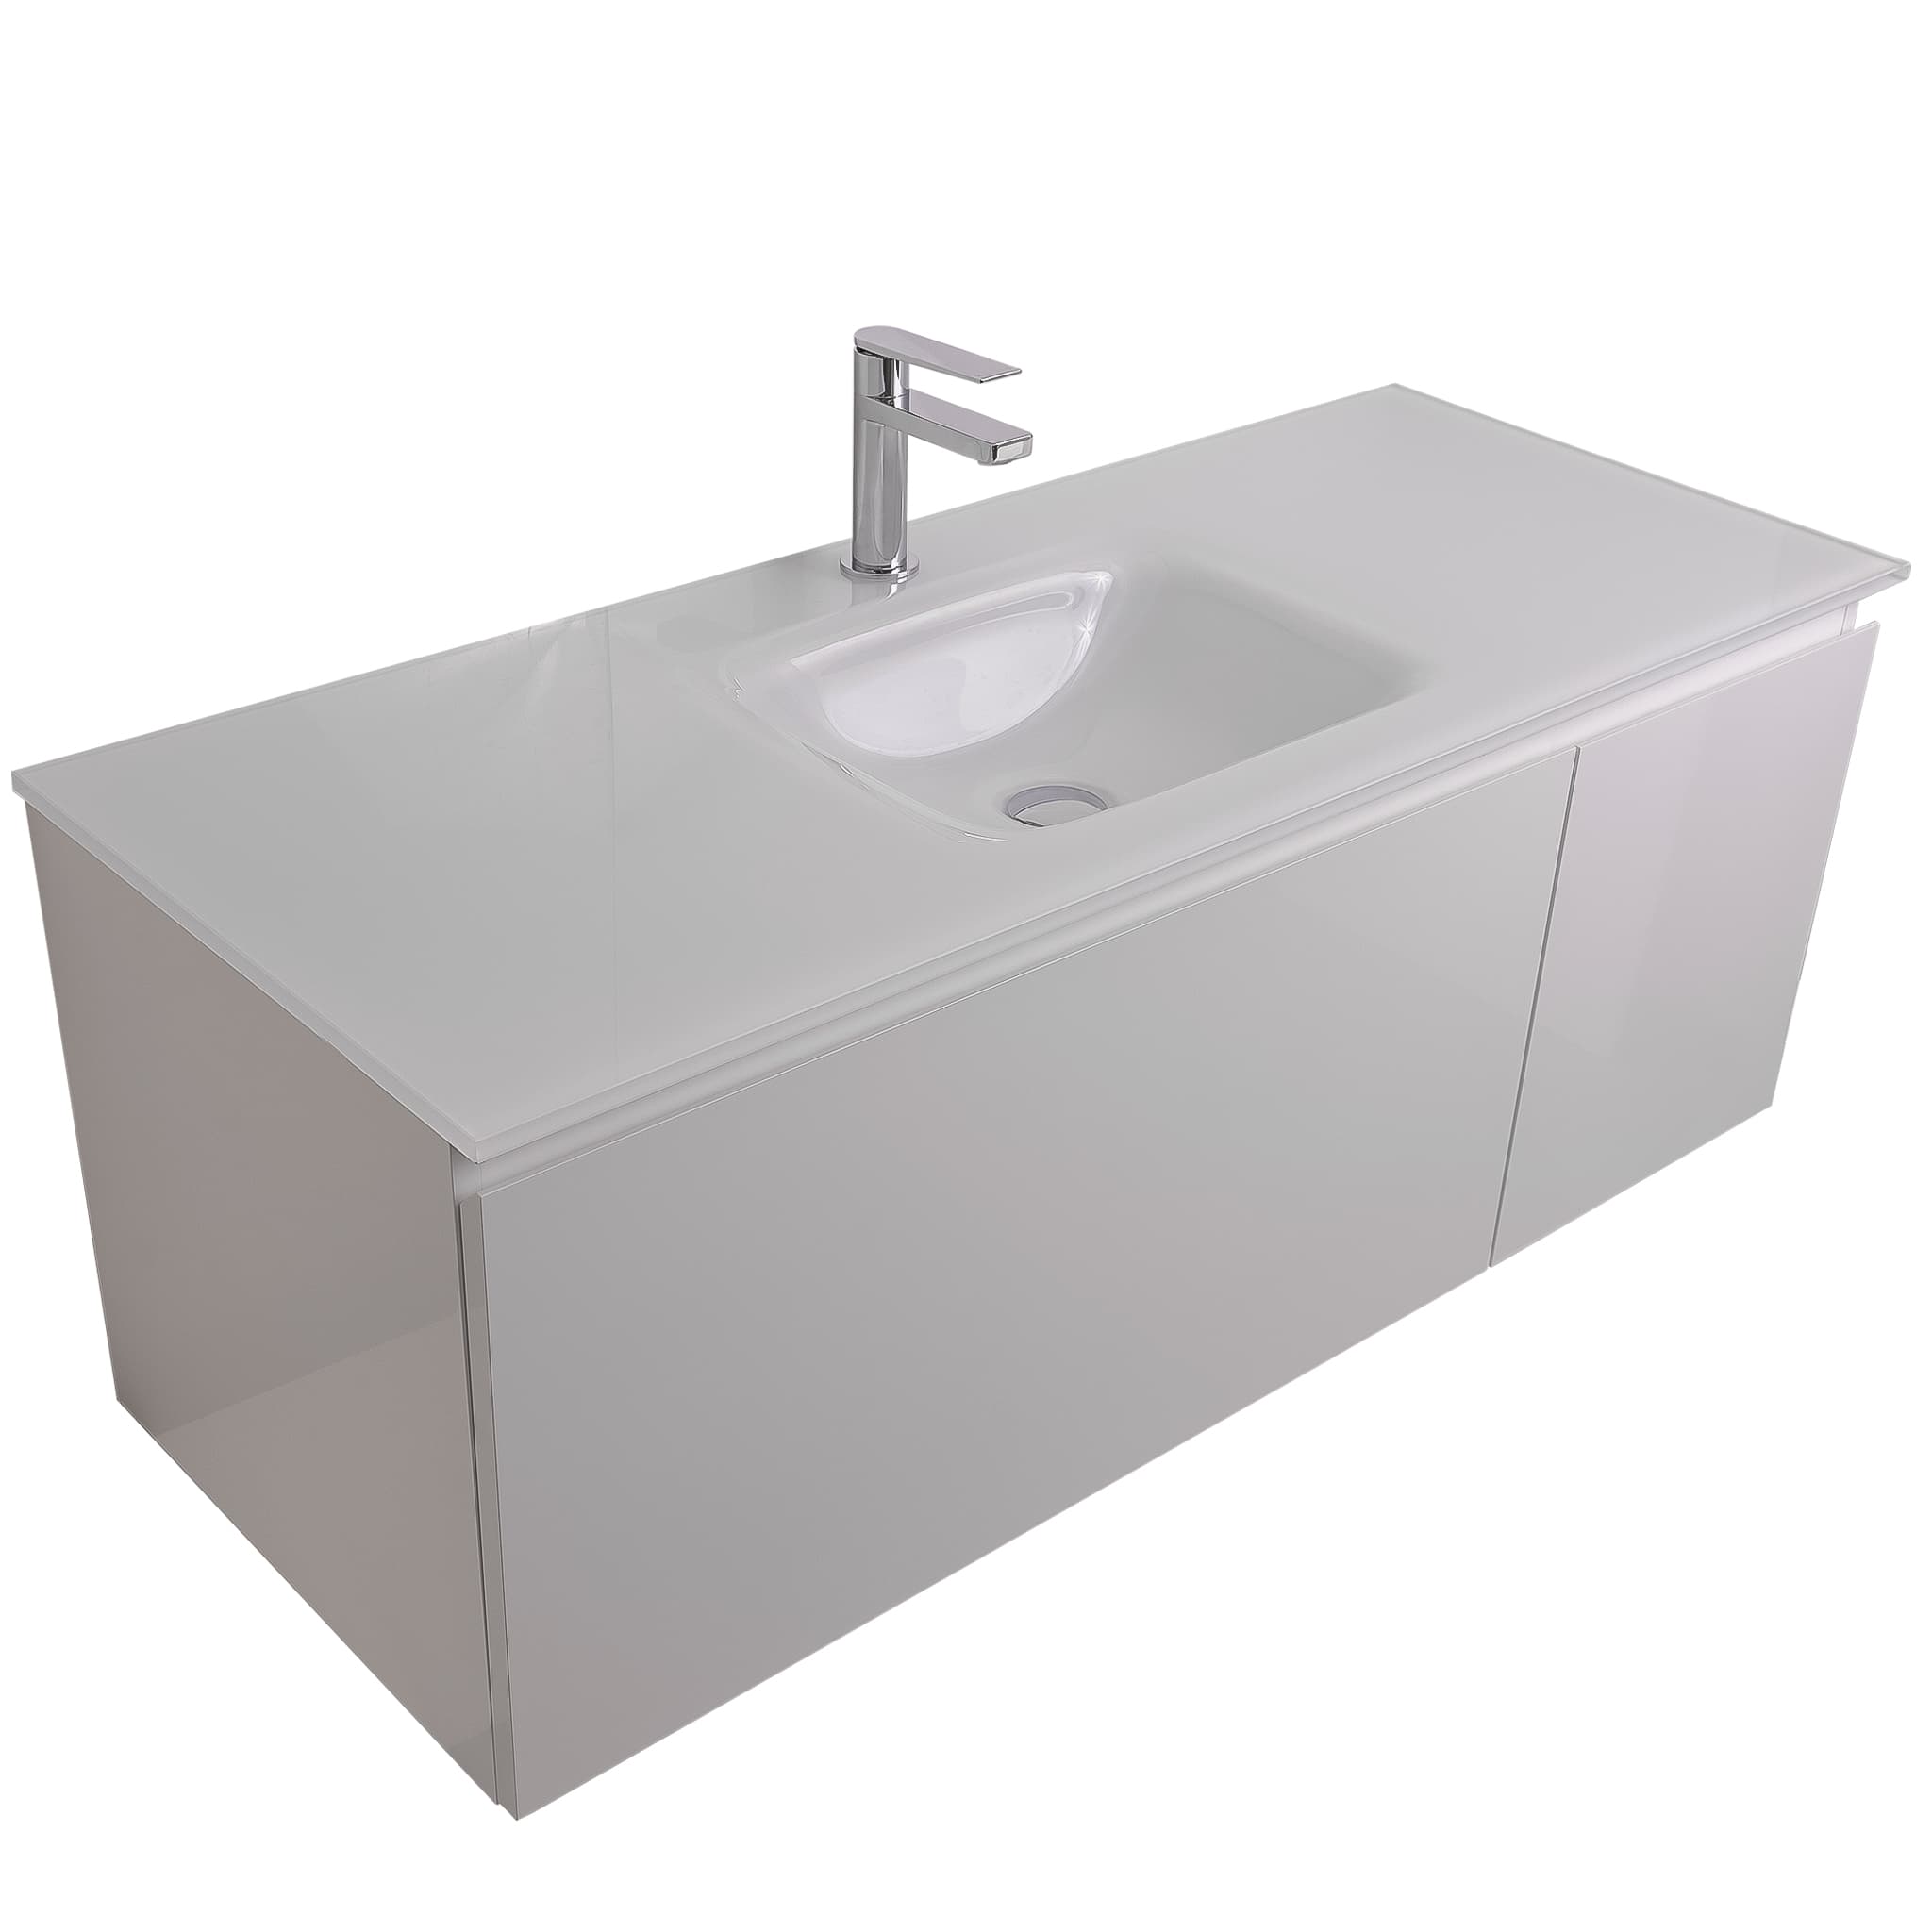 Venice 47.5 White High Gloss Cabinet, White Tempered Glass Sink, Wall Mounted Modern Vanity Set